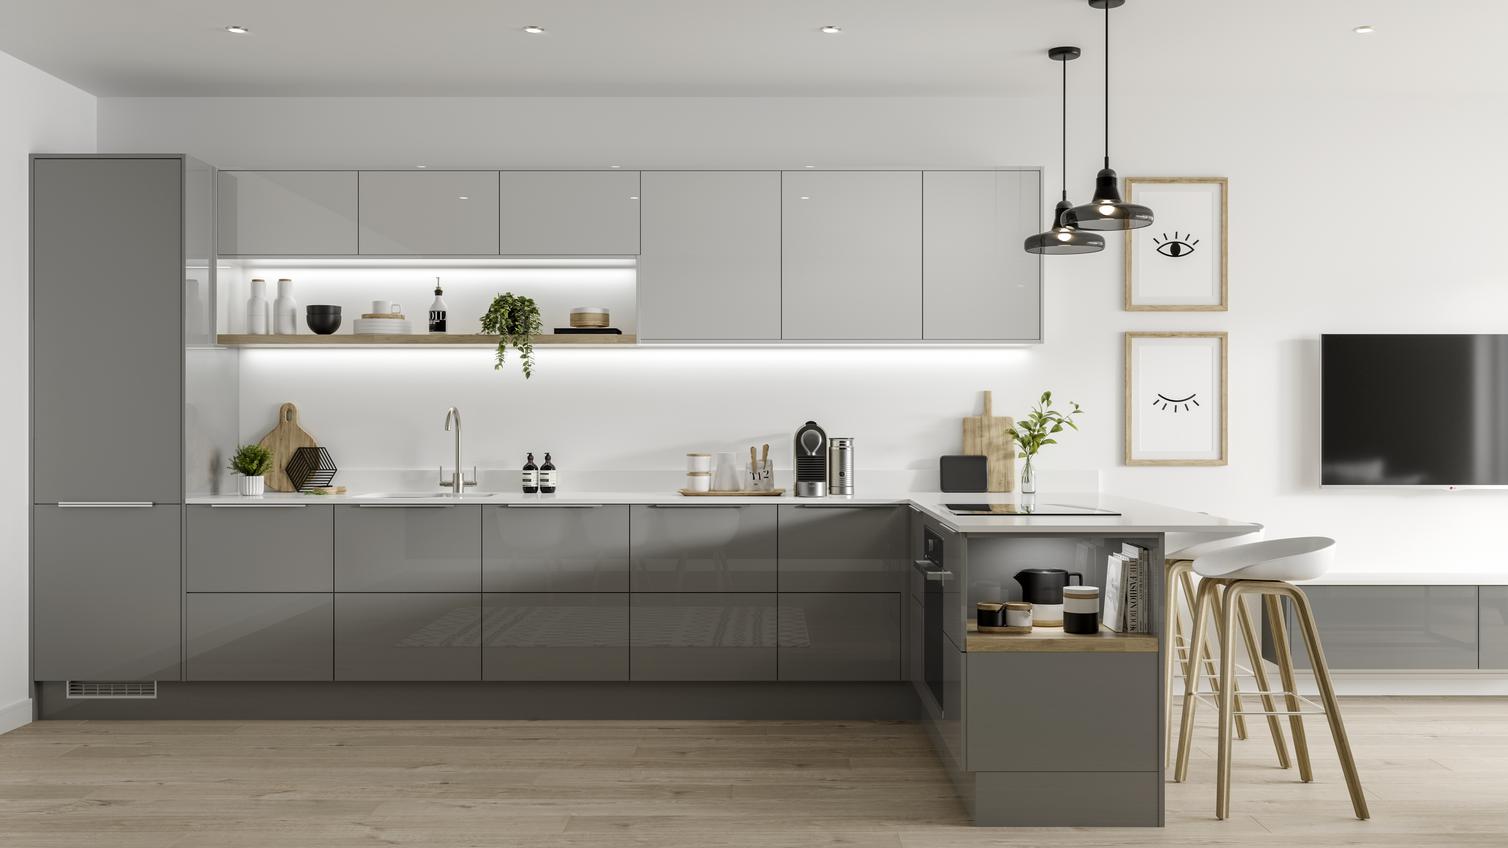 Slate grey l shaped handleless kitchen with half height and full height wall units and contrasting white kitchen worktop.